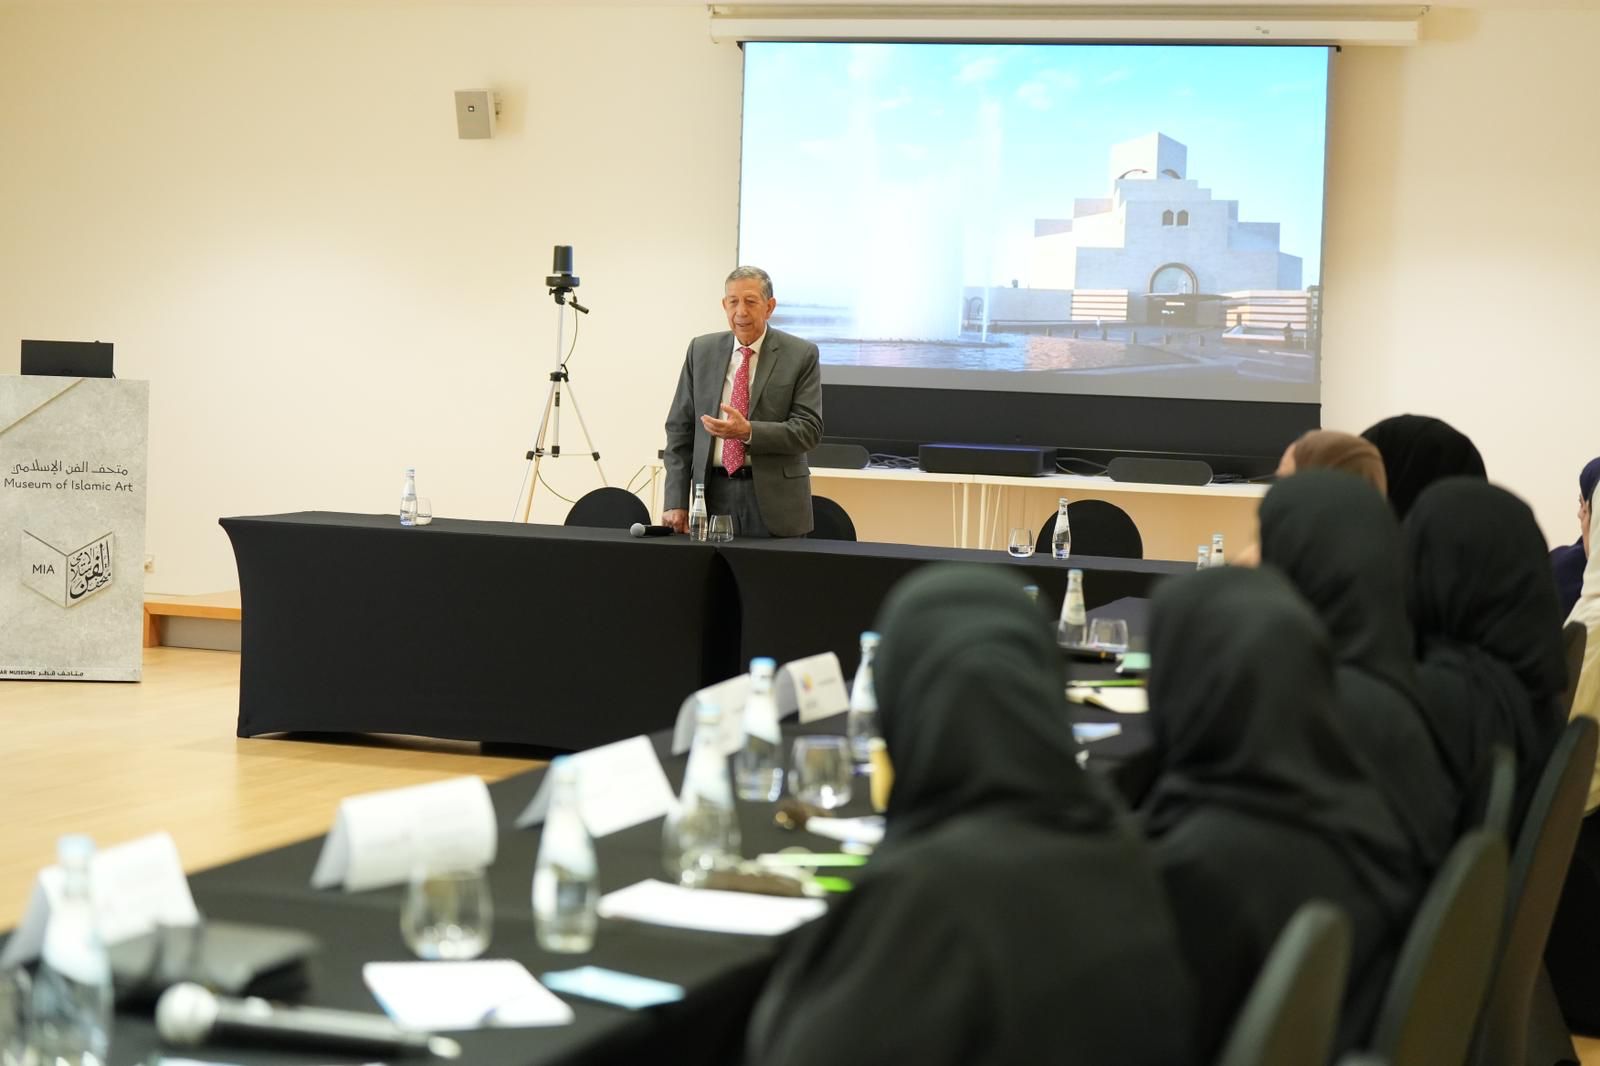 In collaboration with the Qatar Museums Authority, the Arab Regional Center for World Heritage organized a workshop on Mechanisms and Concepts of the 1972 World Heritage Convention and the 1954 Convention for the Protection of Cultural Property in the Event of Armed Conflict